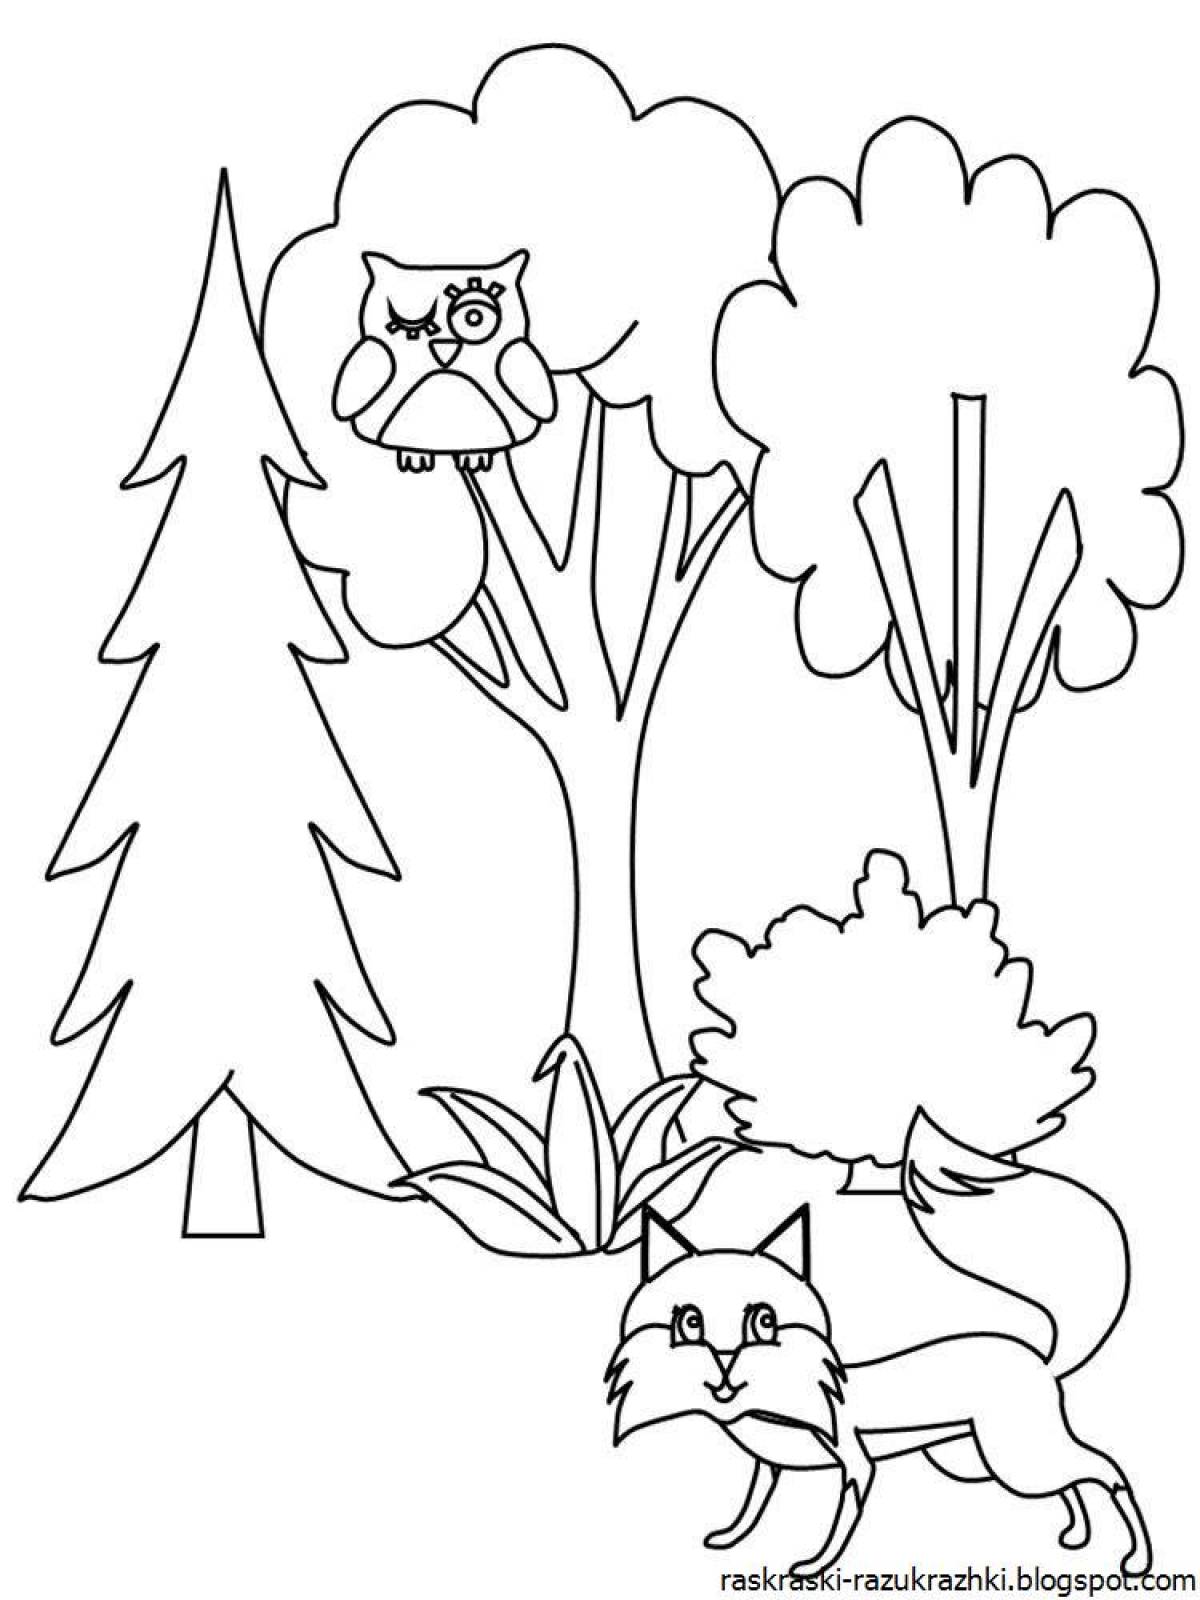 Coloring peaceful forest for kids